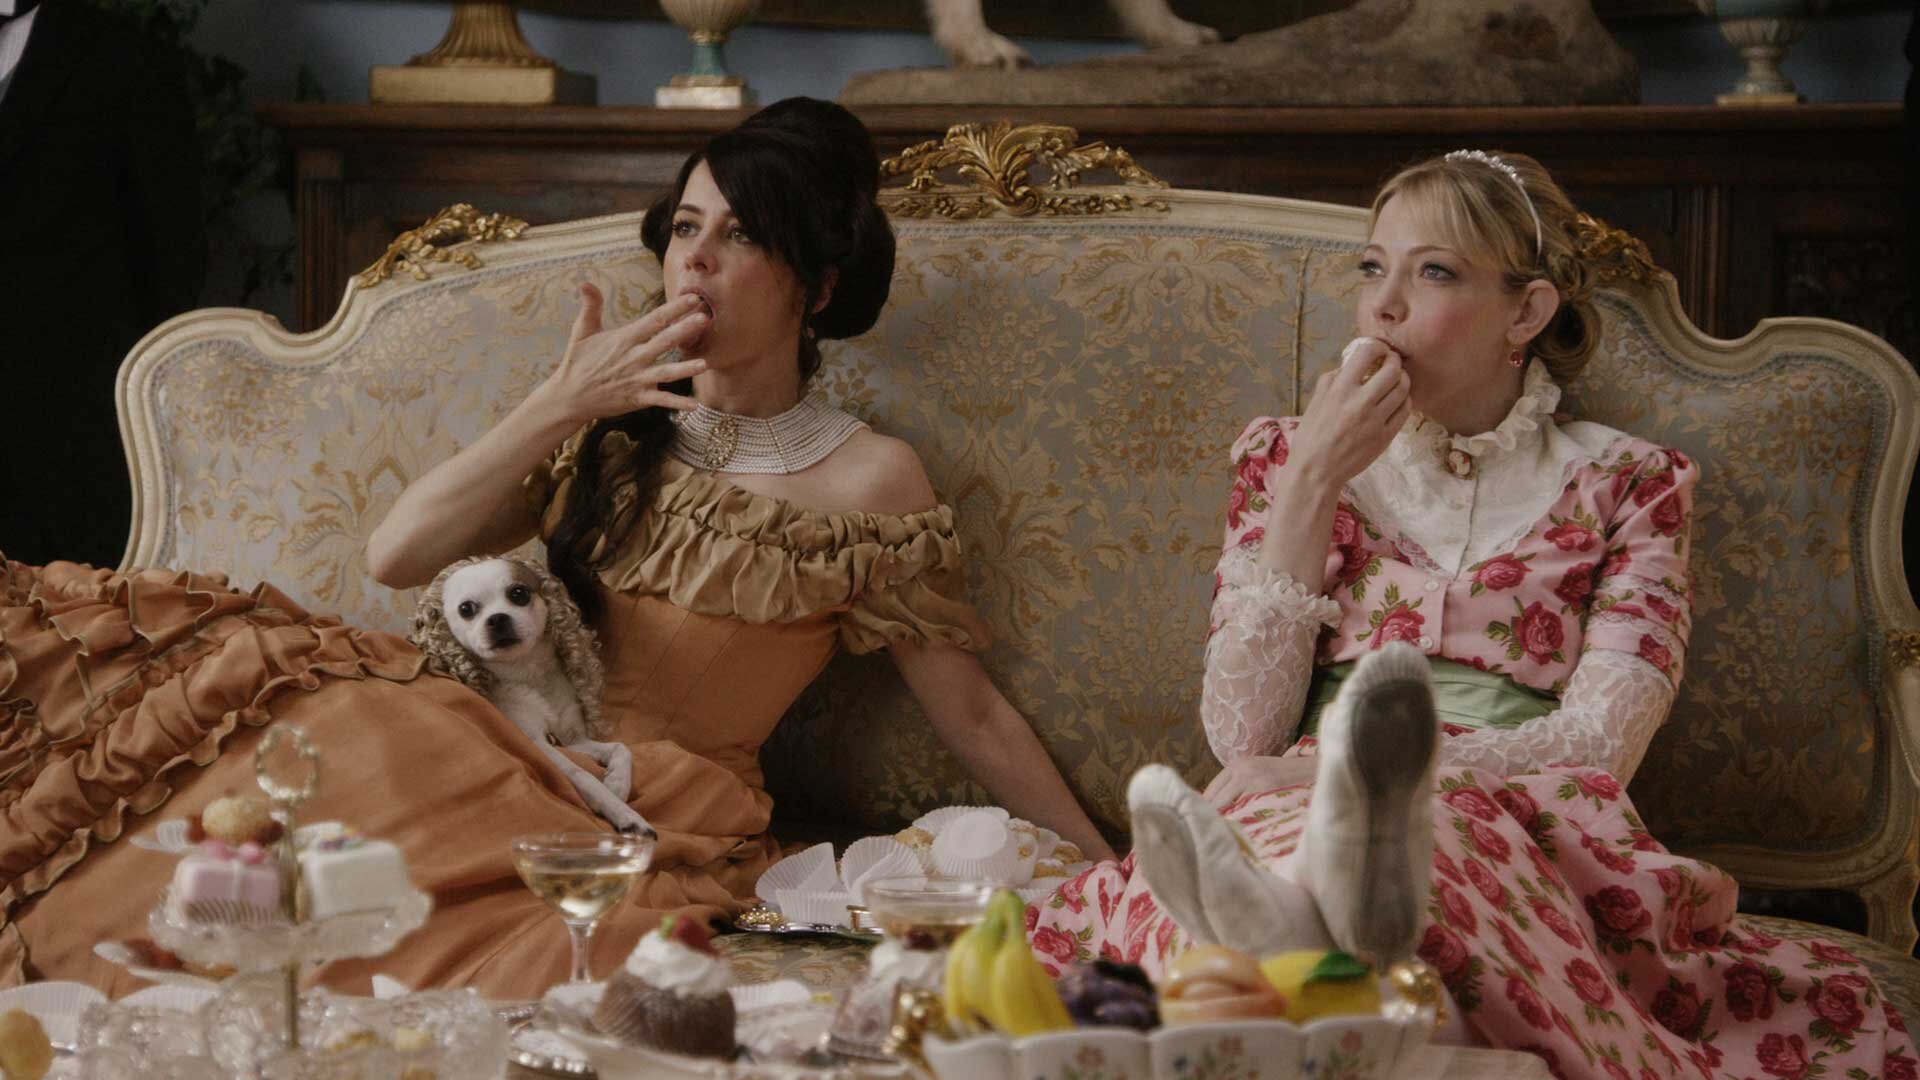 comedycentral-COMEDYCENTRAL_ANOTHERPERIOD_SEASON_1-Full-Image_GalleryBackground-en-US-1483994503211._RI_.jpg